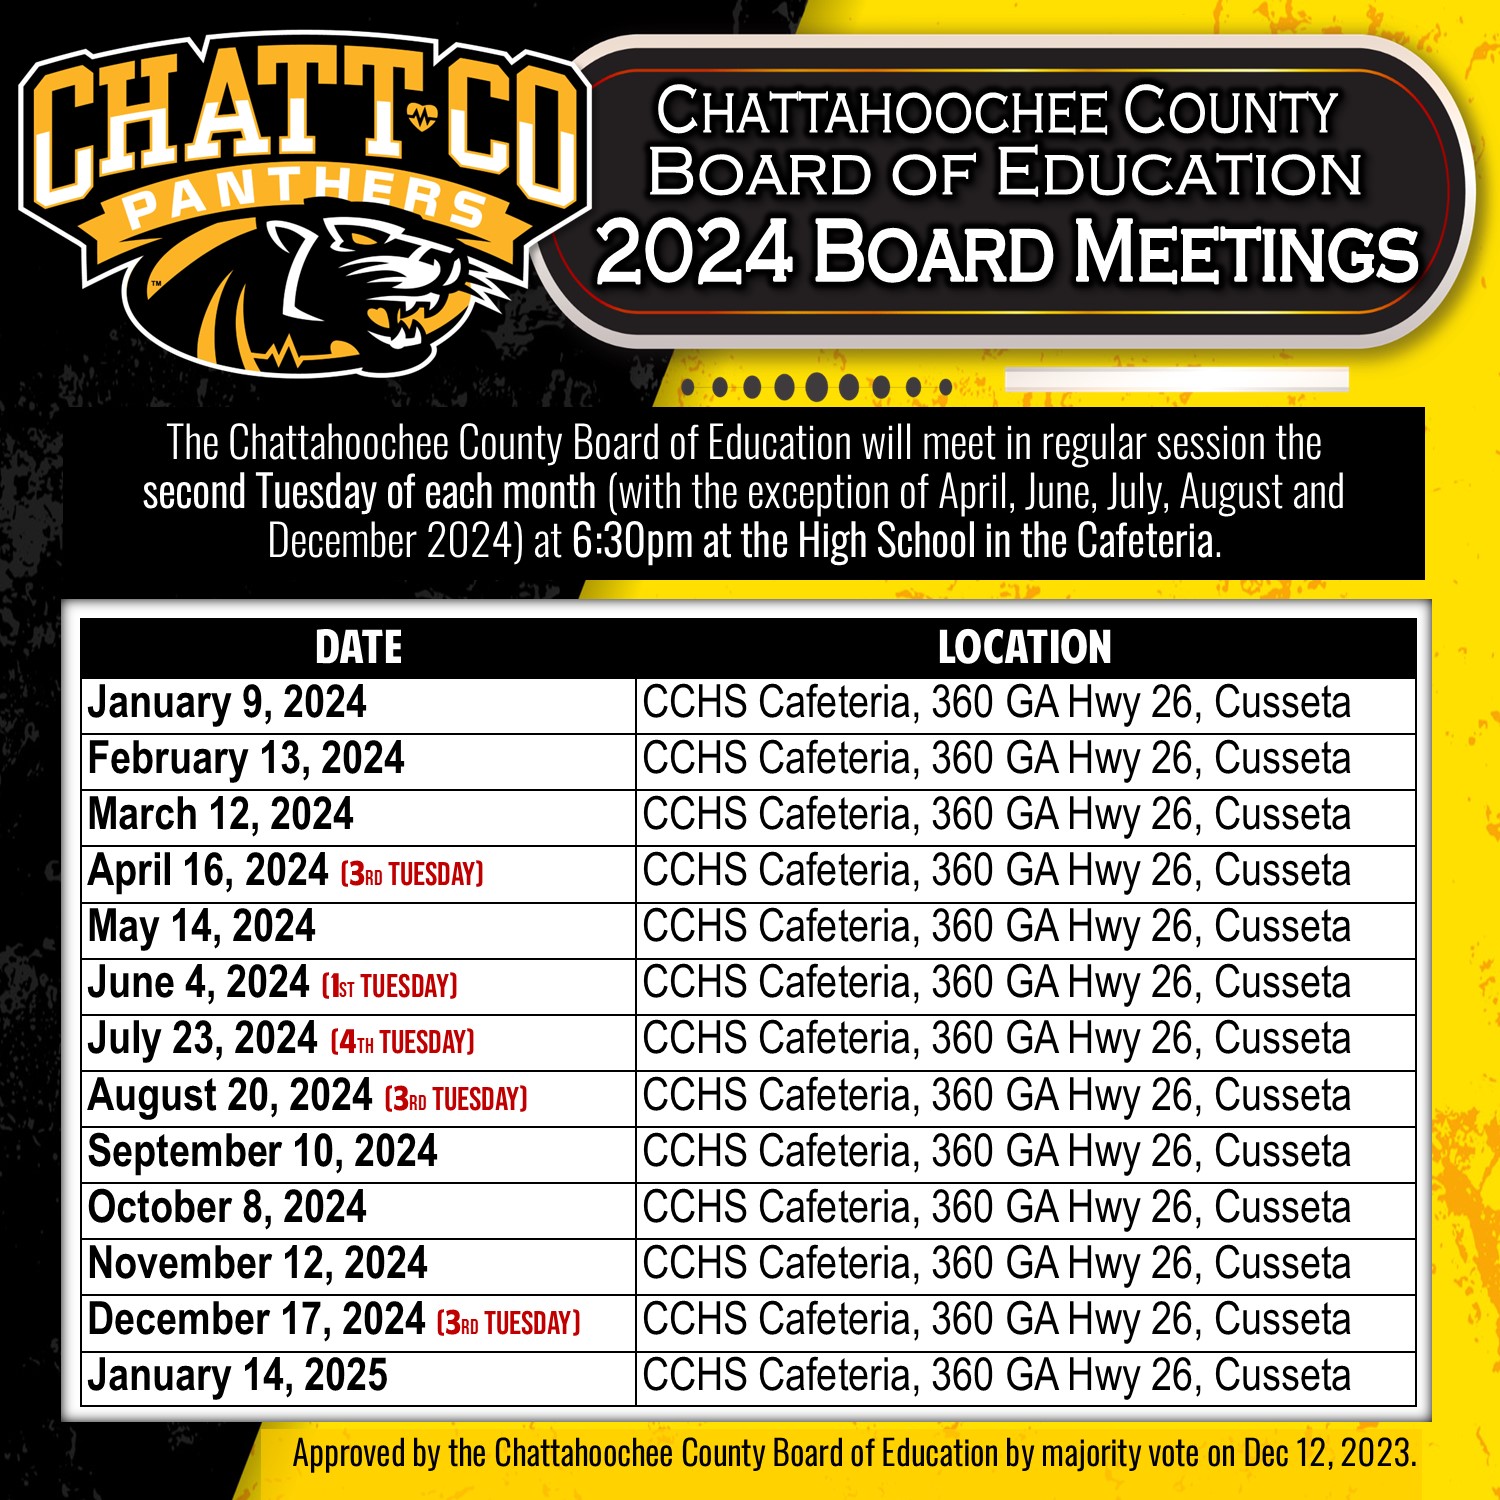 Chattahoochee County Board of Education 2024 Board Meetings. The CCBOE will meet in regular session the second Tuesday of each month (with the exception of April, June, July, August and  December 2024) at 6:30pm at the High School in the Cafeteria.  January 9, 2024 February 13, 2024 March 12, 2024 April 16, 2024 (3rd Tuesday) May 14, 2024 June 4, 2024 (1st Tuesday) July 23, 2024 (4th Tuesday) August 20, 2024 (3rd Tuesday) September 10, 2024 October 8, 2024 November 12, 2024 December 17, 2024 (3rd Tuesday) January 14, 2025  Approved by the Chattahoochee County Board of Education by majority vote on Dec 12, 2023